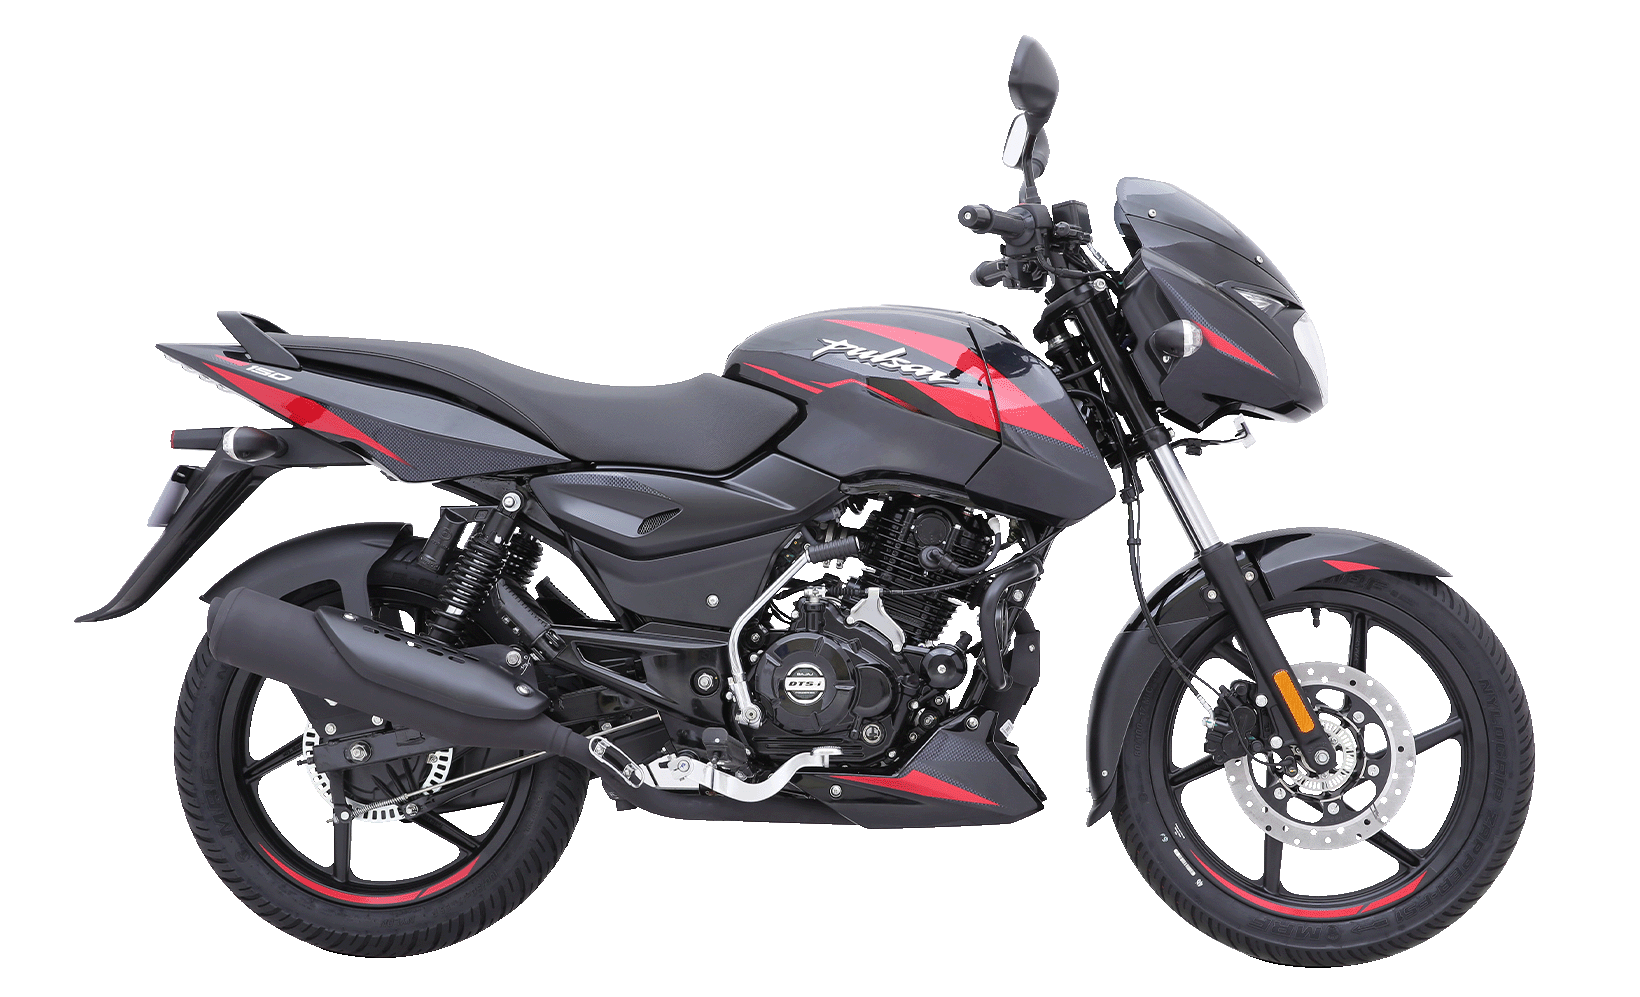 Pulsar-150-SD-with-ABS-price-in-bangladesh